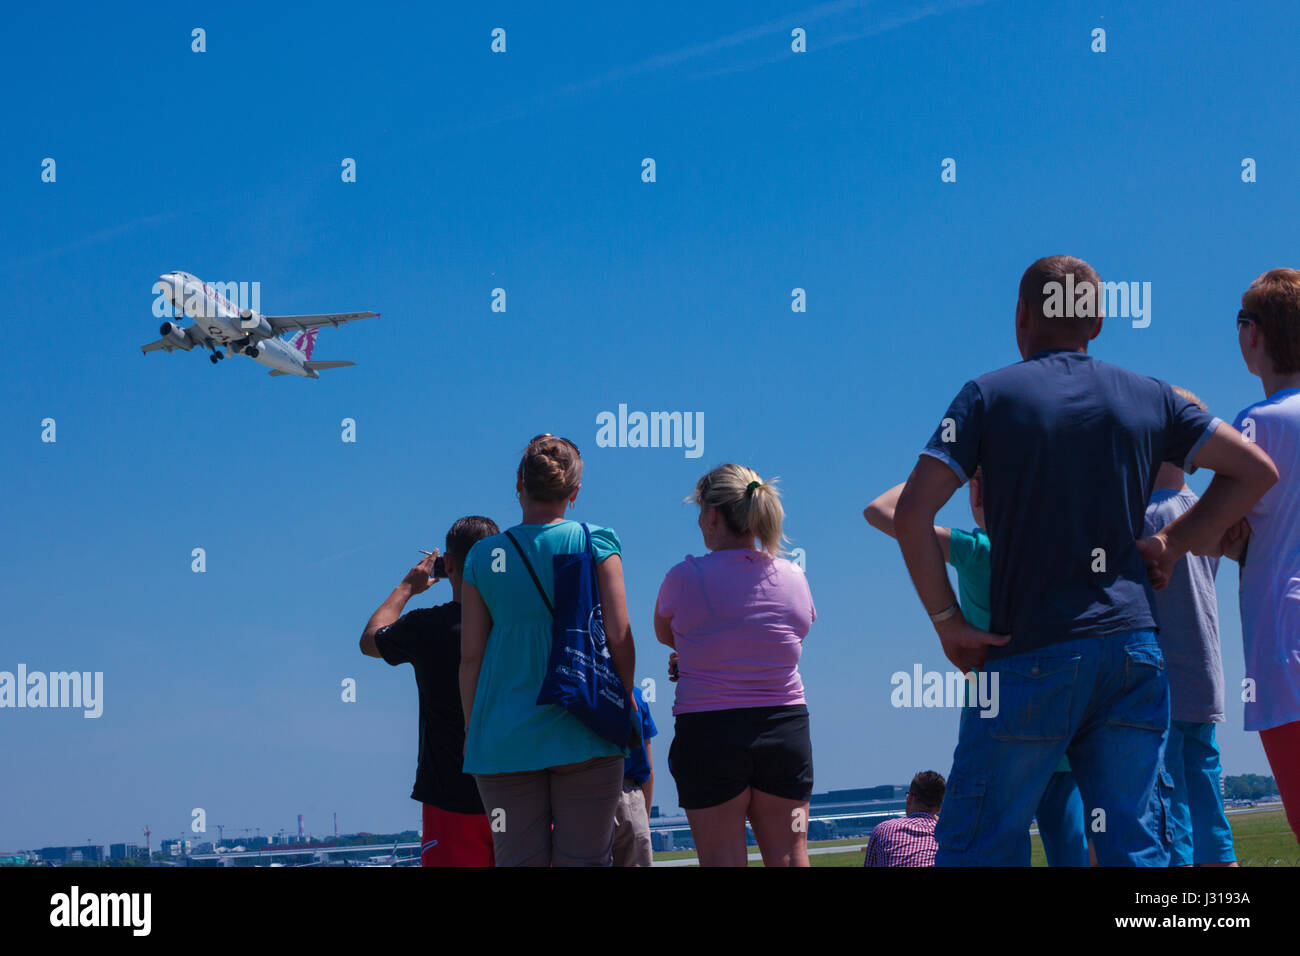 Plane spotters watching an airplane take off from Warsaw Okecie, Chopin airport in Warsaw, Poland Stock Photo